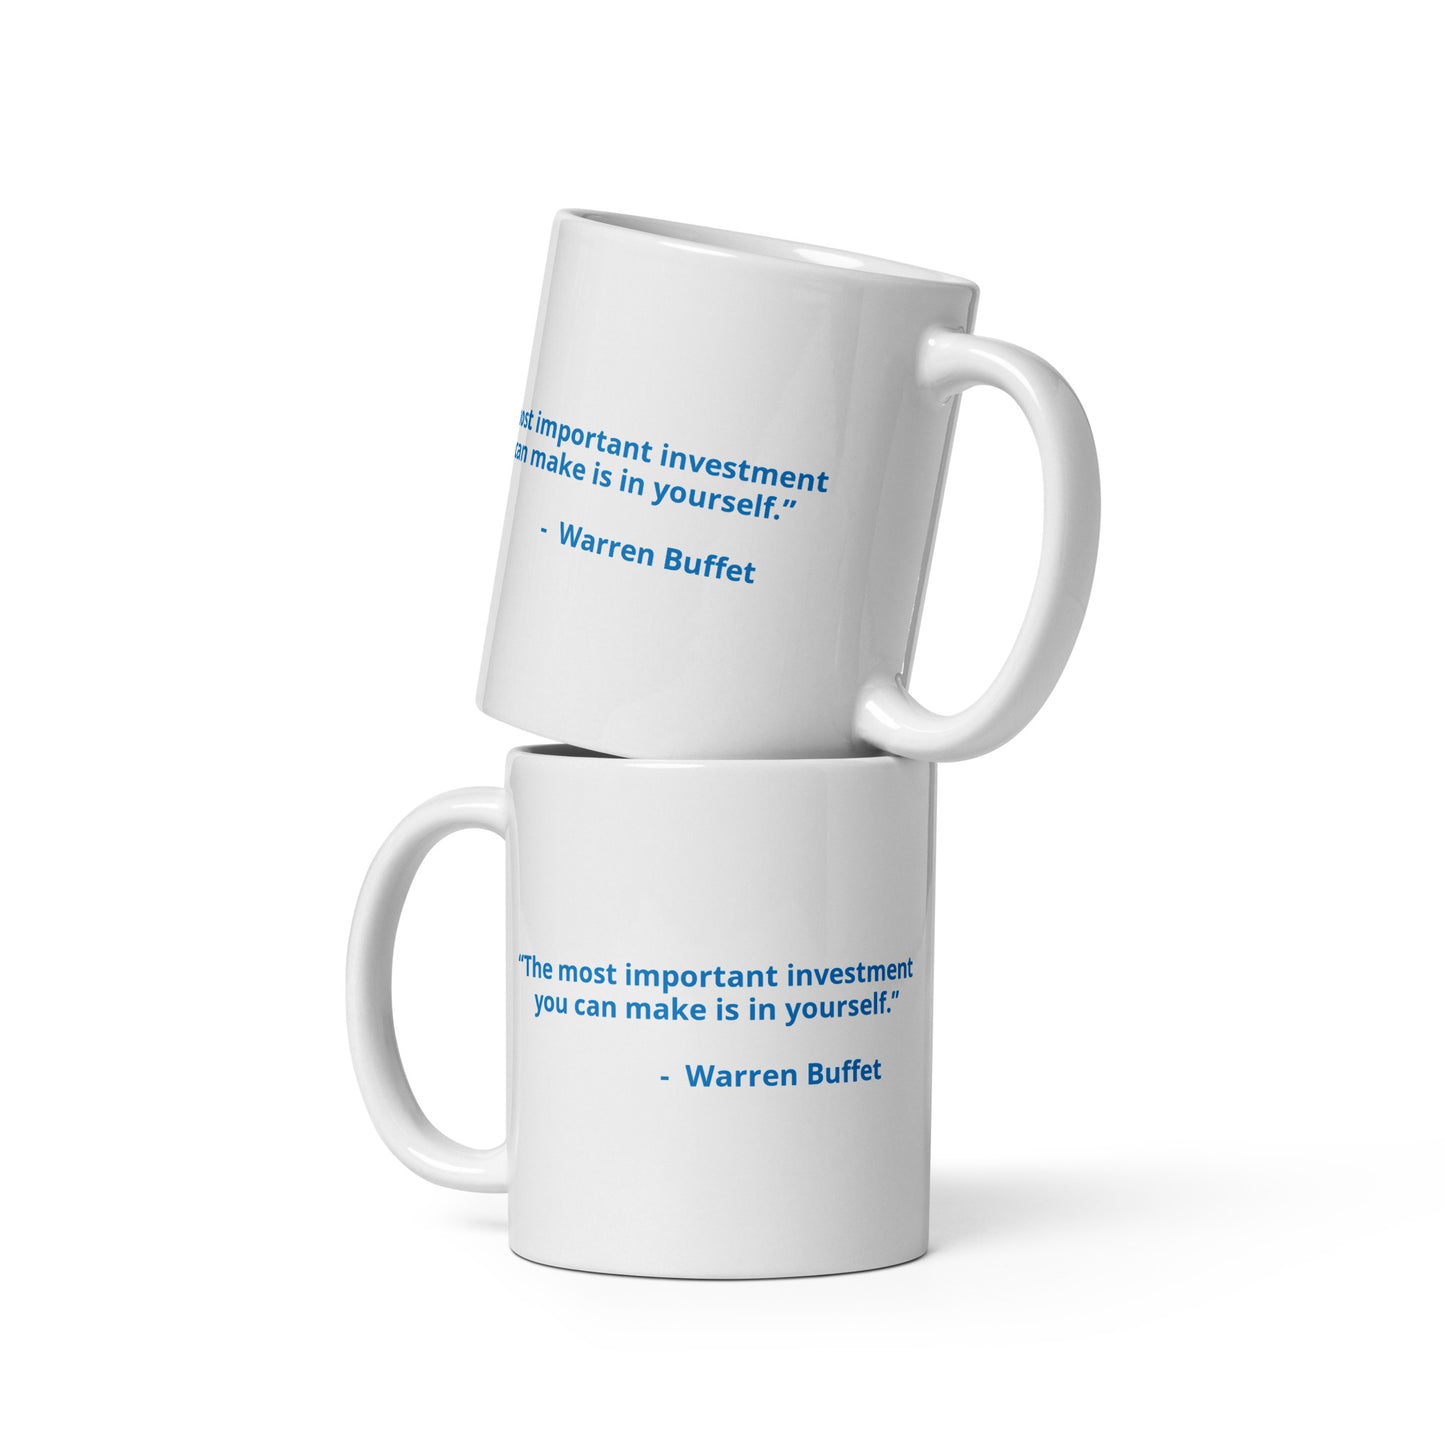 “The most important investment you can make is in yourself.” - Warren Buffet - White glossy mug